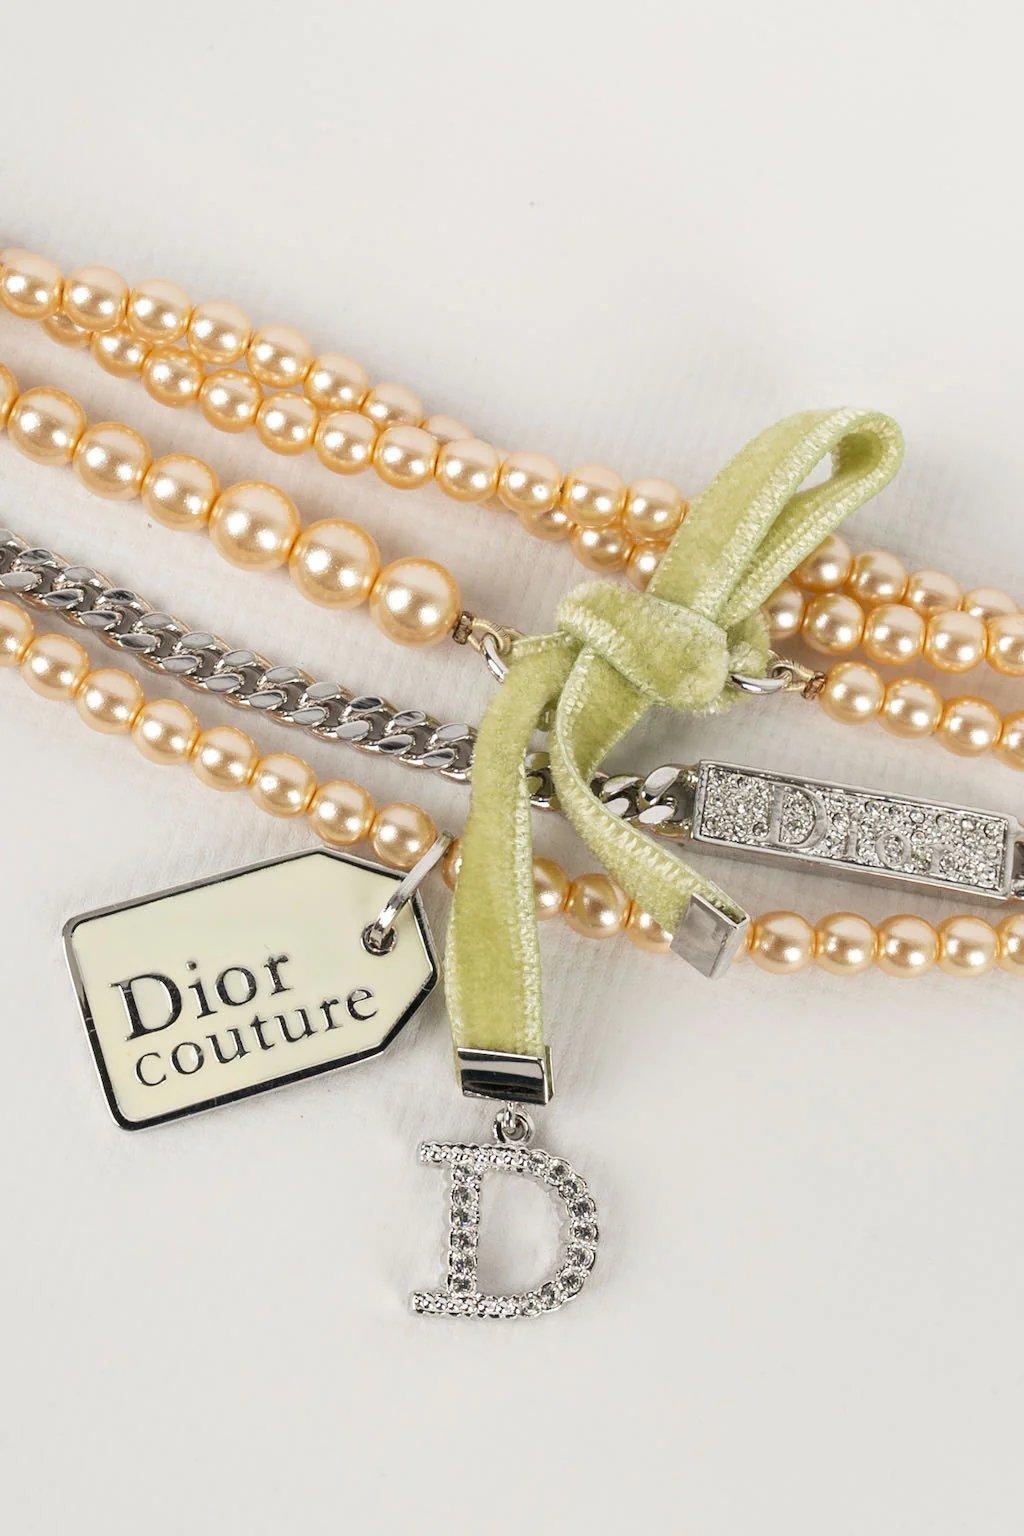 Dior -Multi-row pearl and silver plated metal bracelet.

Additional information:
Dimensions: Length: from 16 - 21 cm 
Height: 4 cm
Condition: Very good condition
Seller Ref number: BRA58